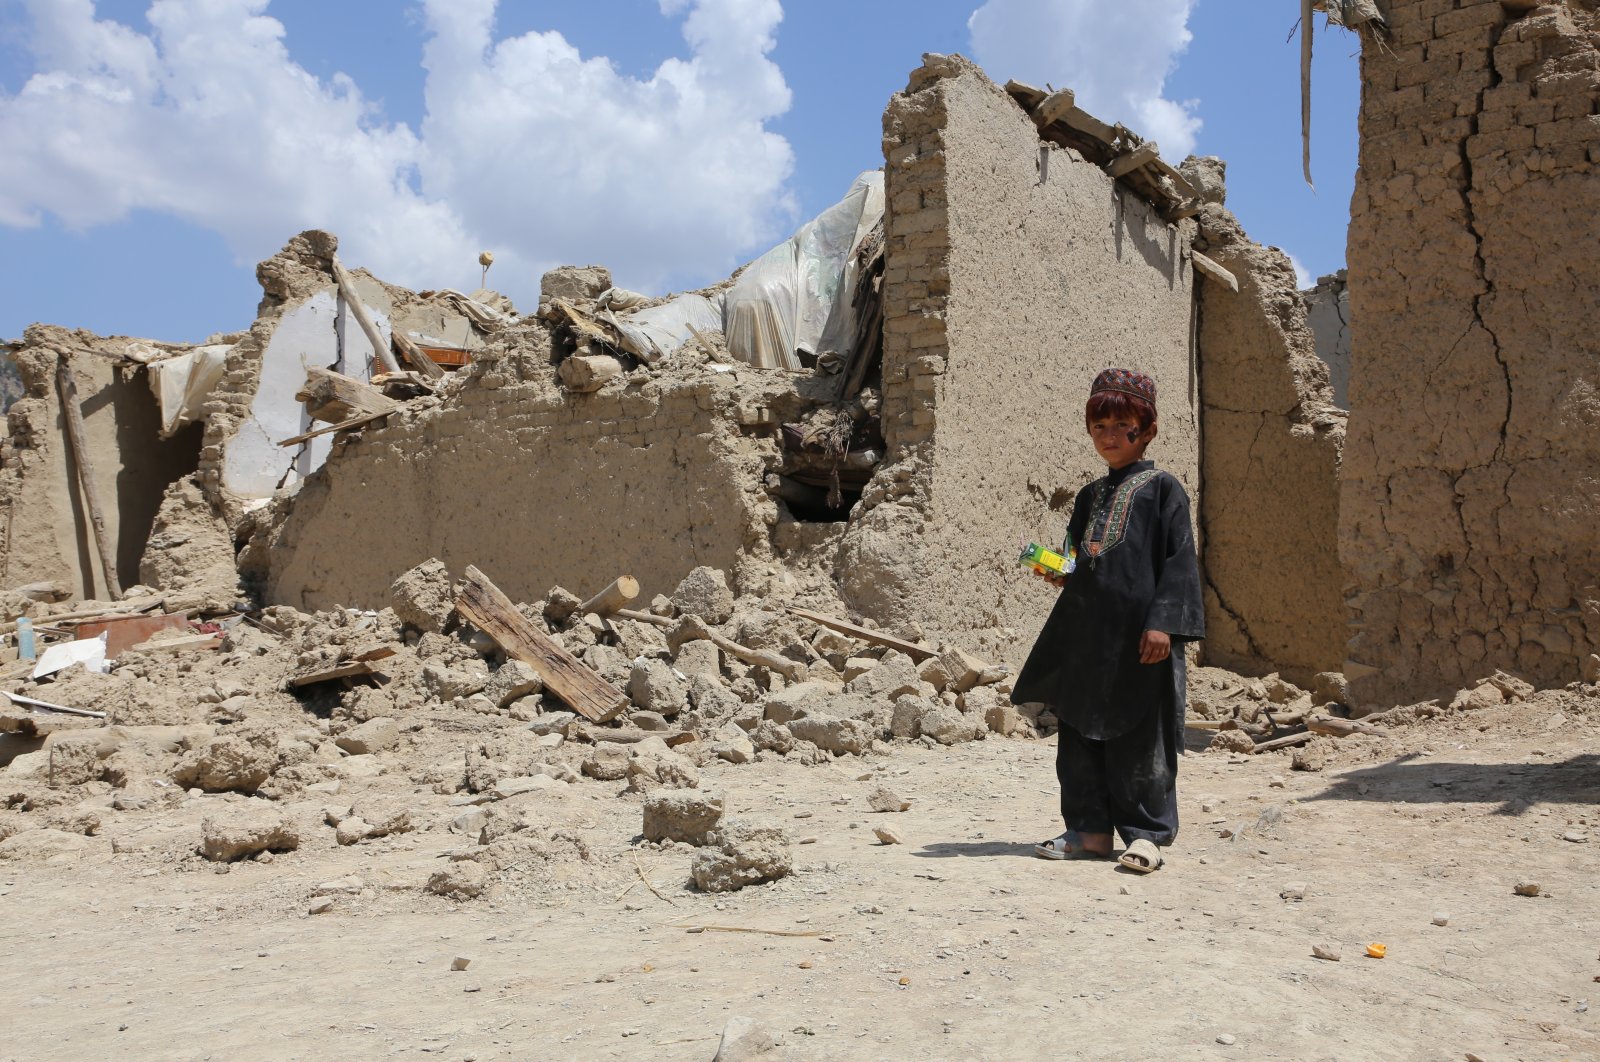 A child stands next to a collapsed building in Paktika, Afghanistan, June 29, 2022. (AA PHOTO)